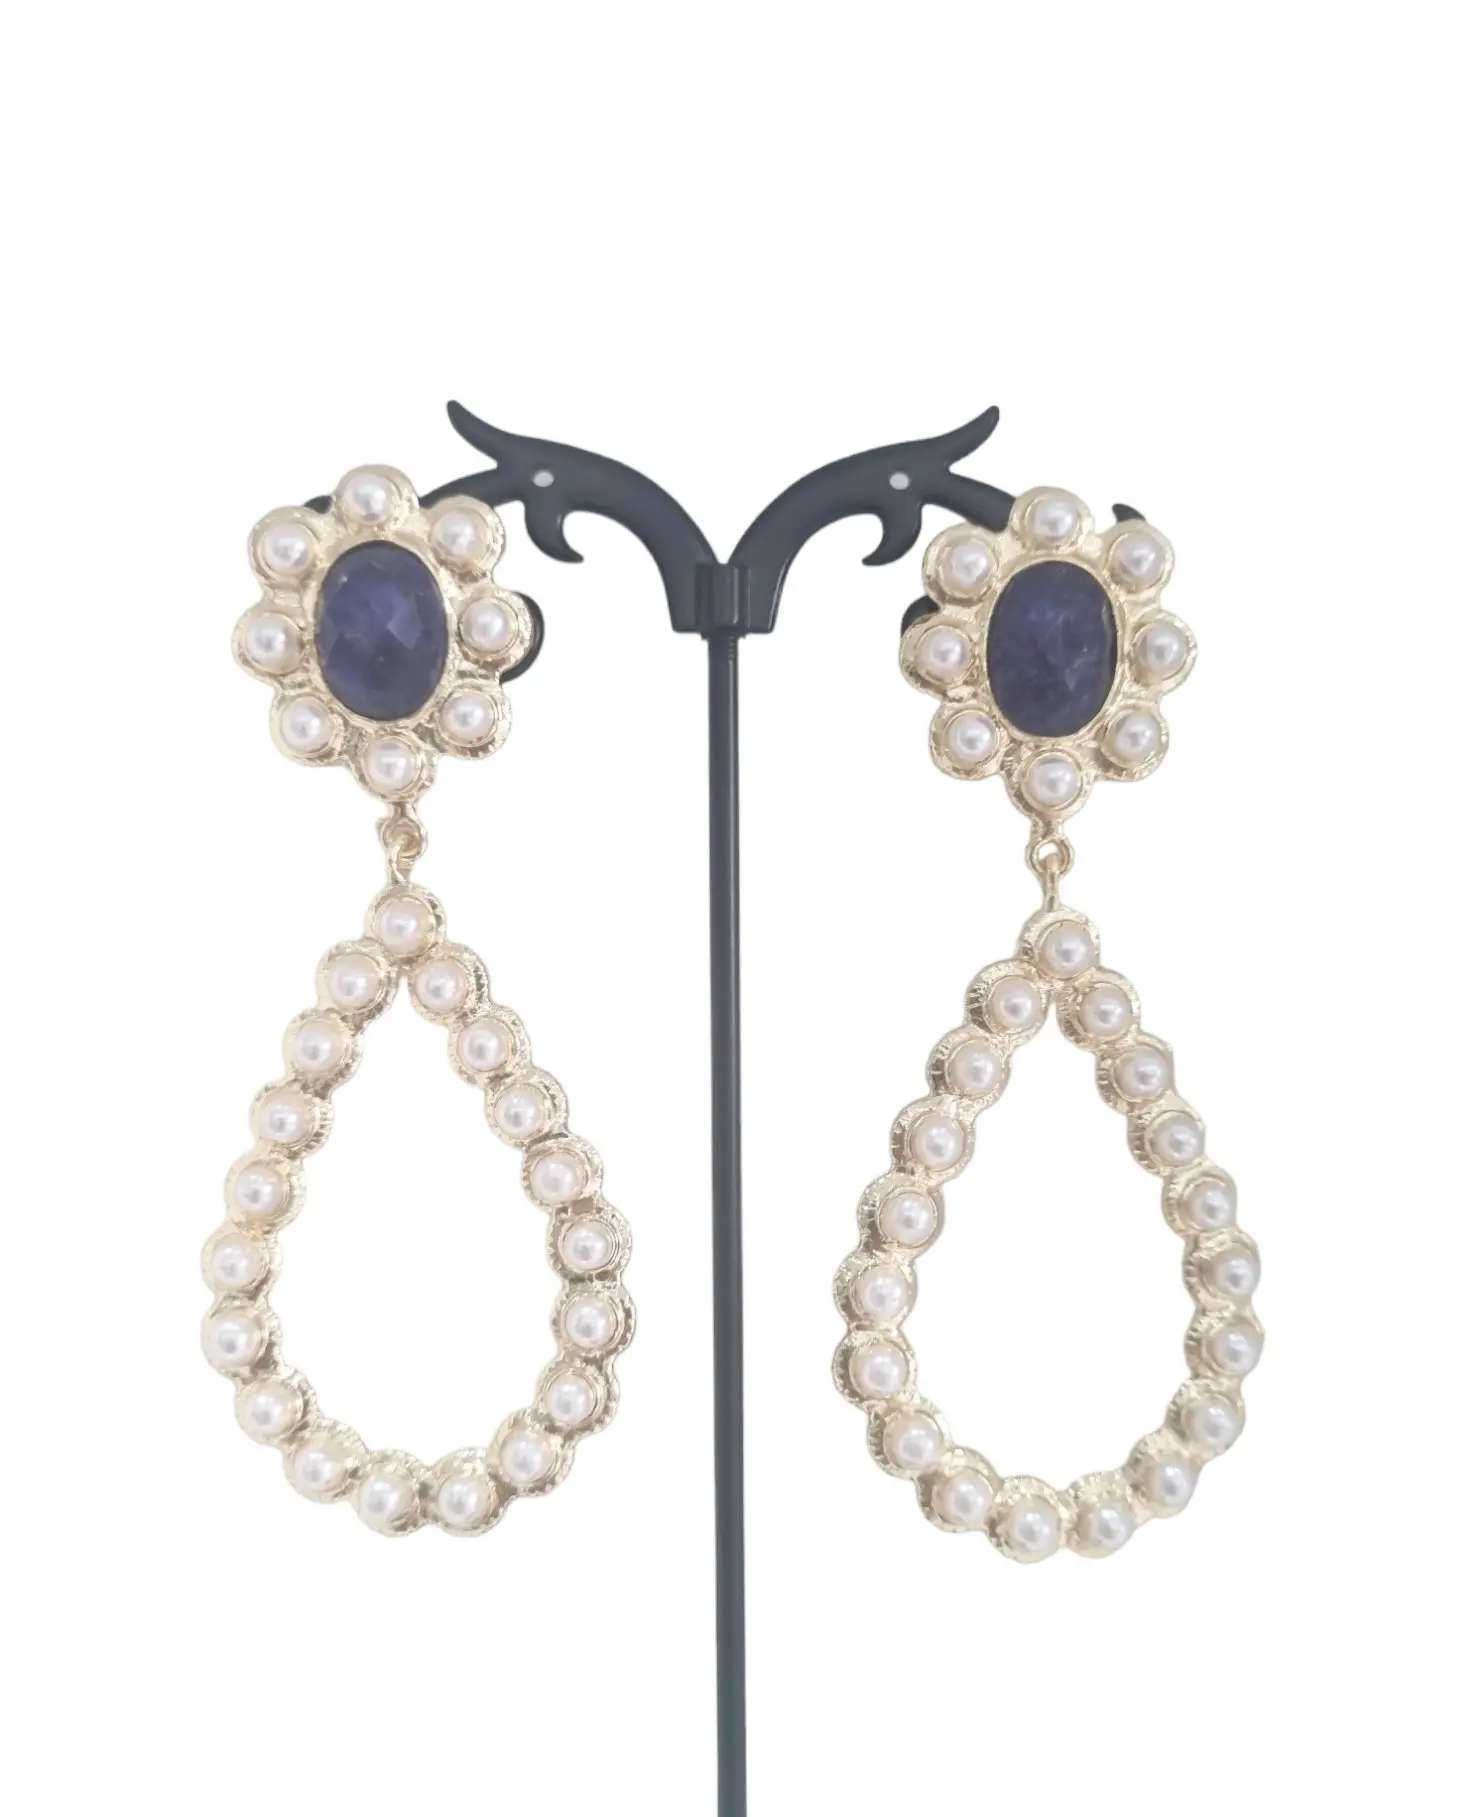 Earrings made with river pearls and lapis lazuli set in brass. Length 8cm Weight 16g